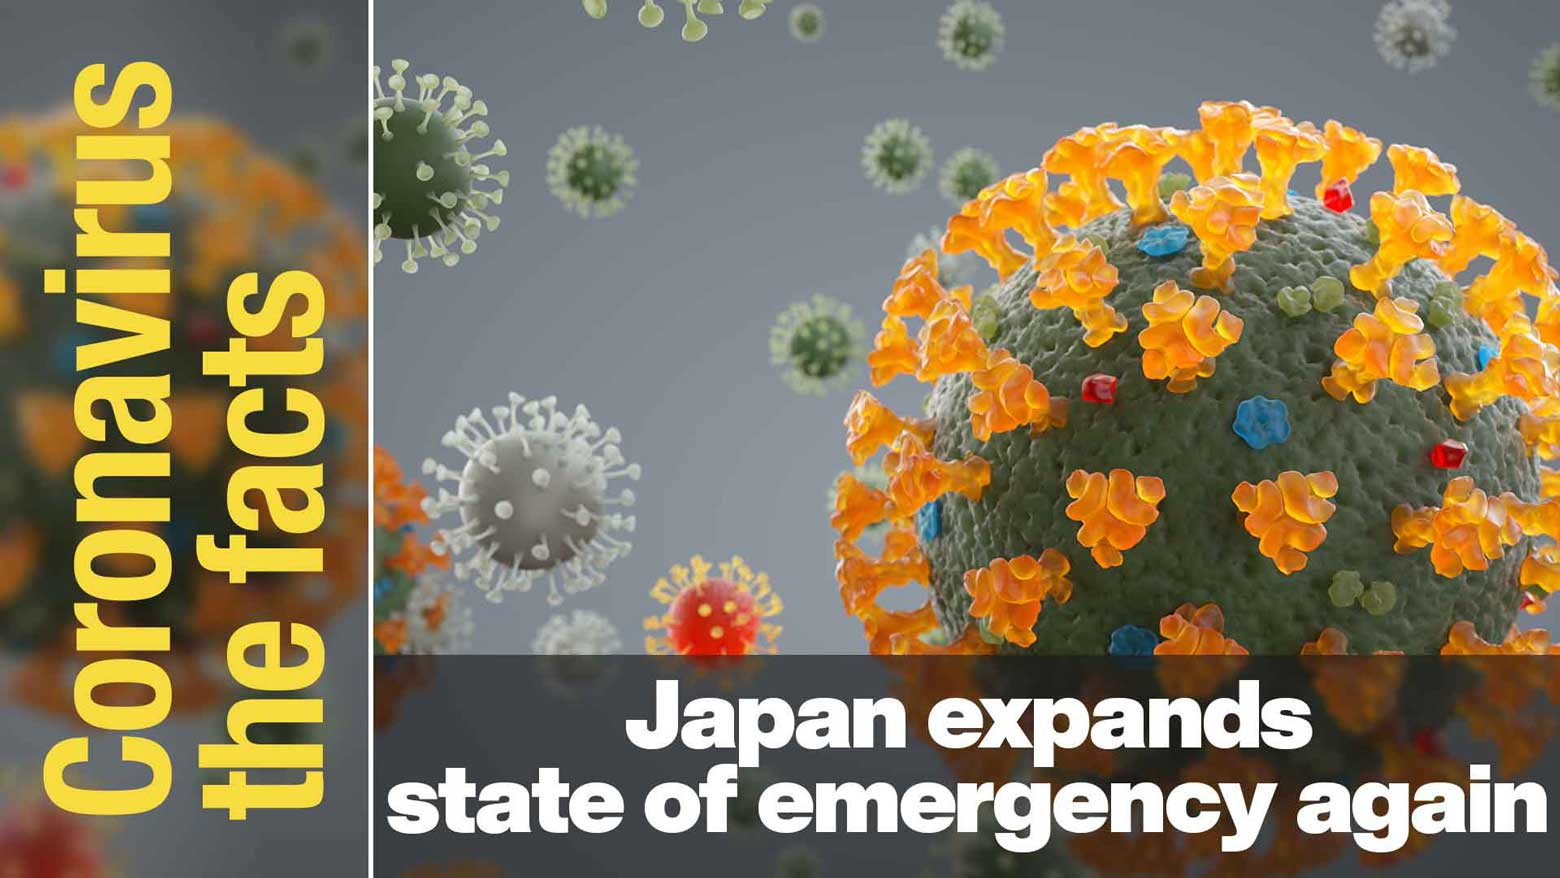 Japan has expanded its 4th state of emergency again as medical system is overwhelmed